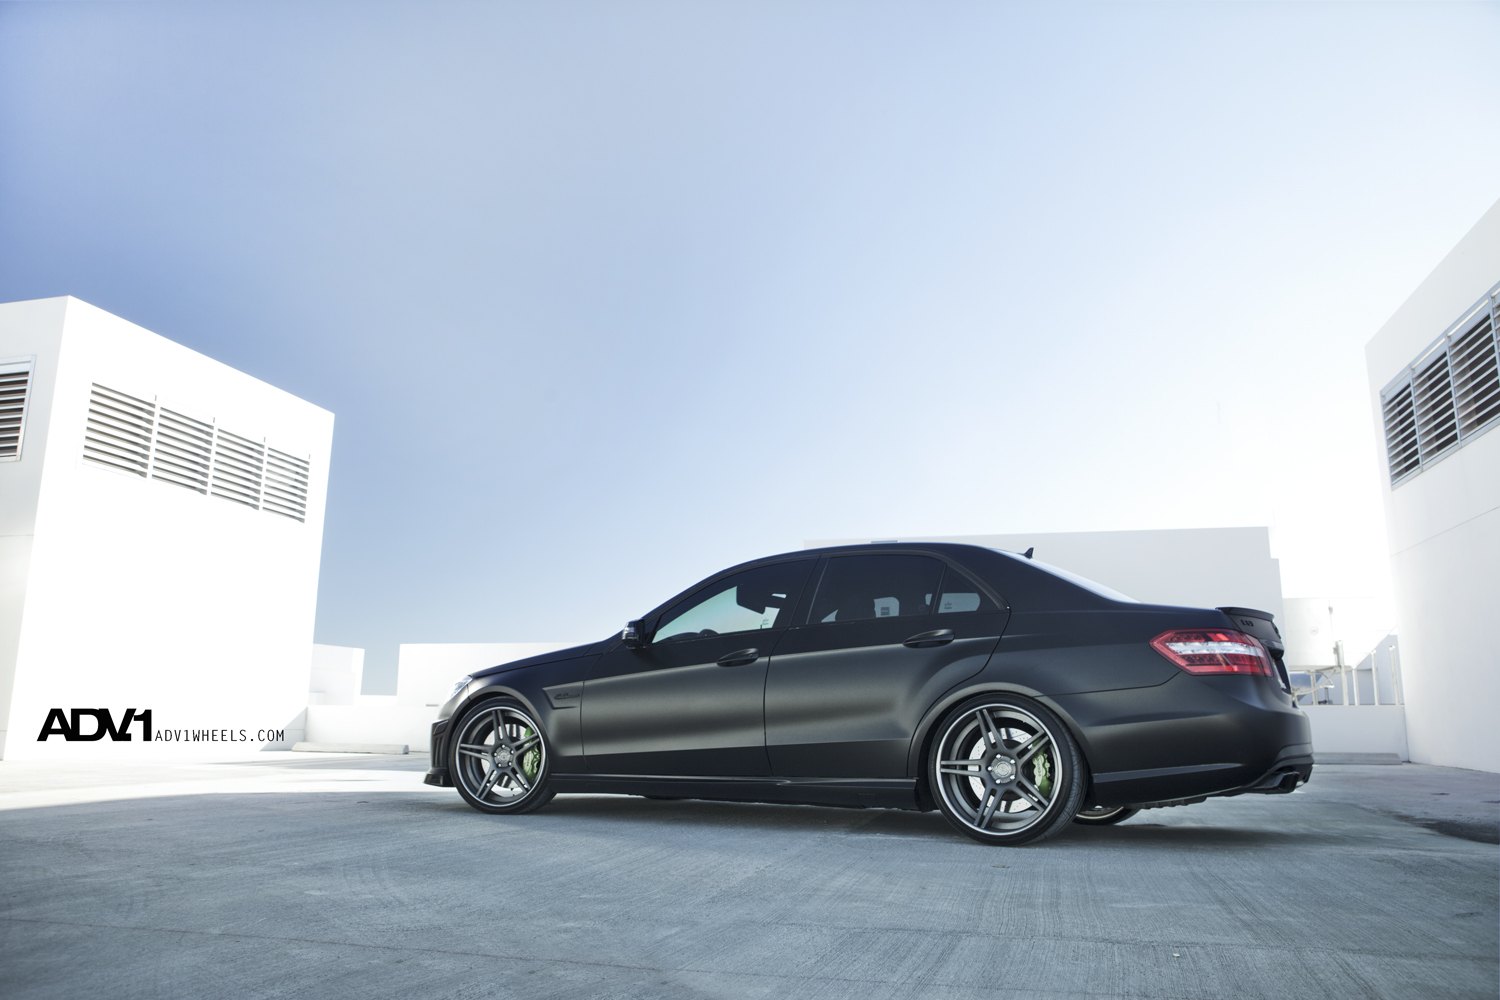 Mercedes E63 AMG With Lowered Suspension - Photo by ADV.1